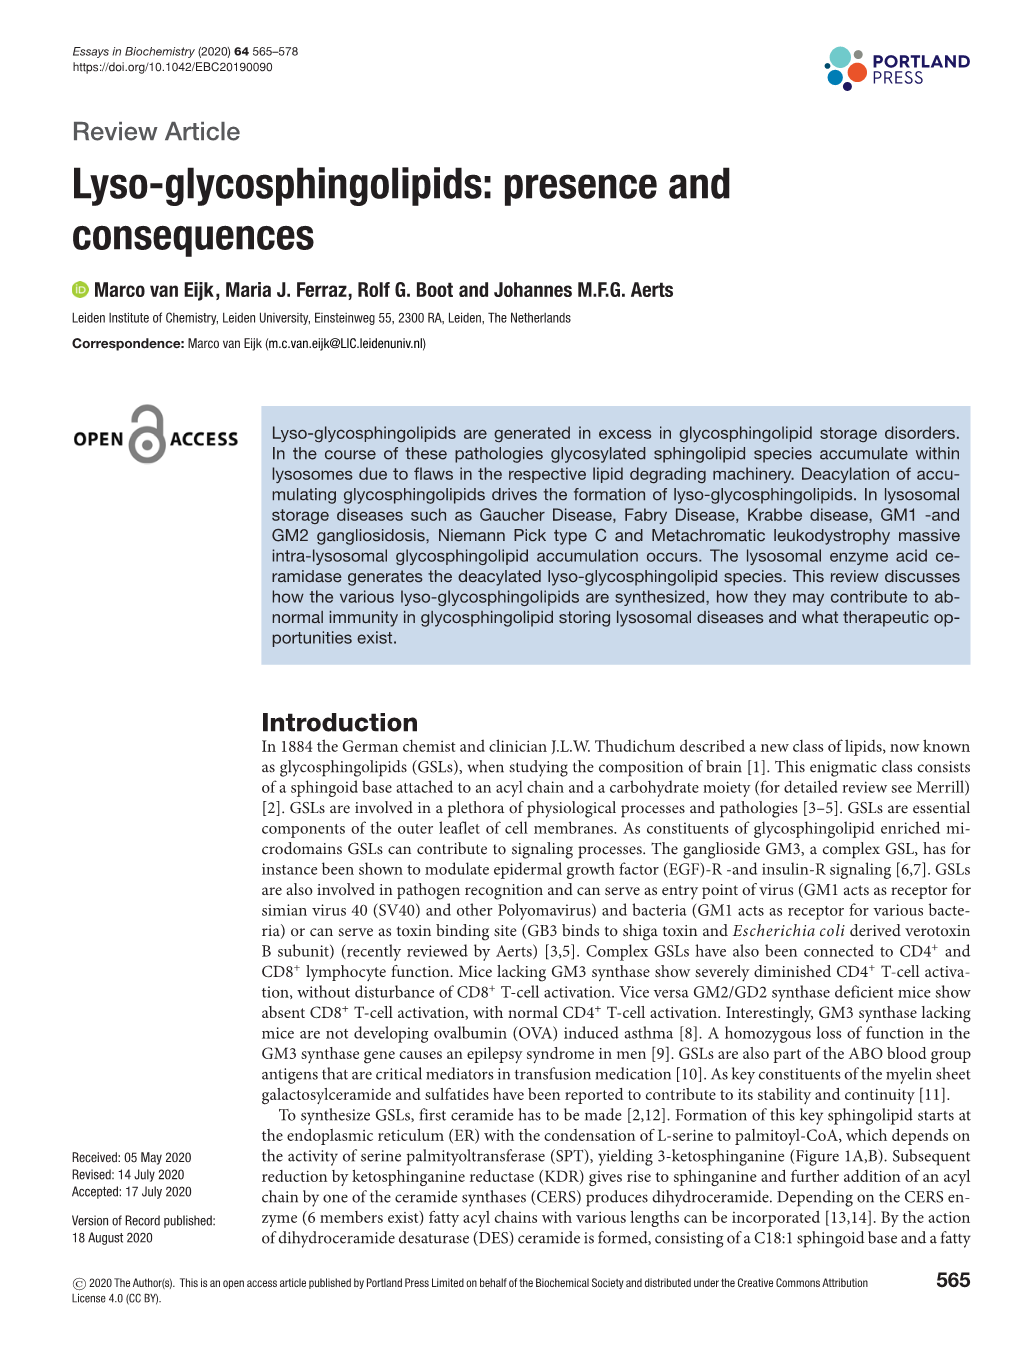 Lyso-Glycosphingolipids: Presence and Consequences